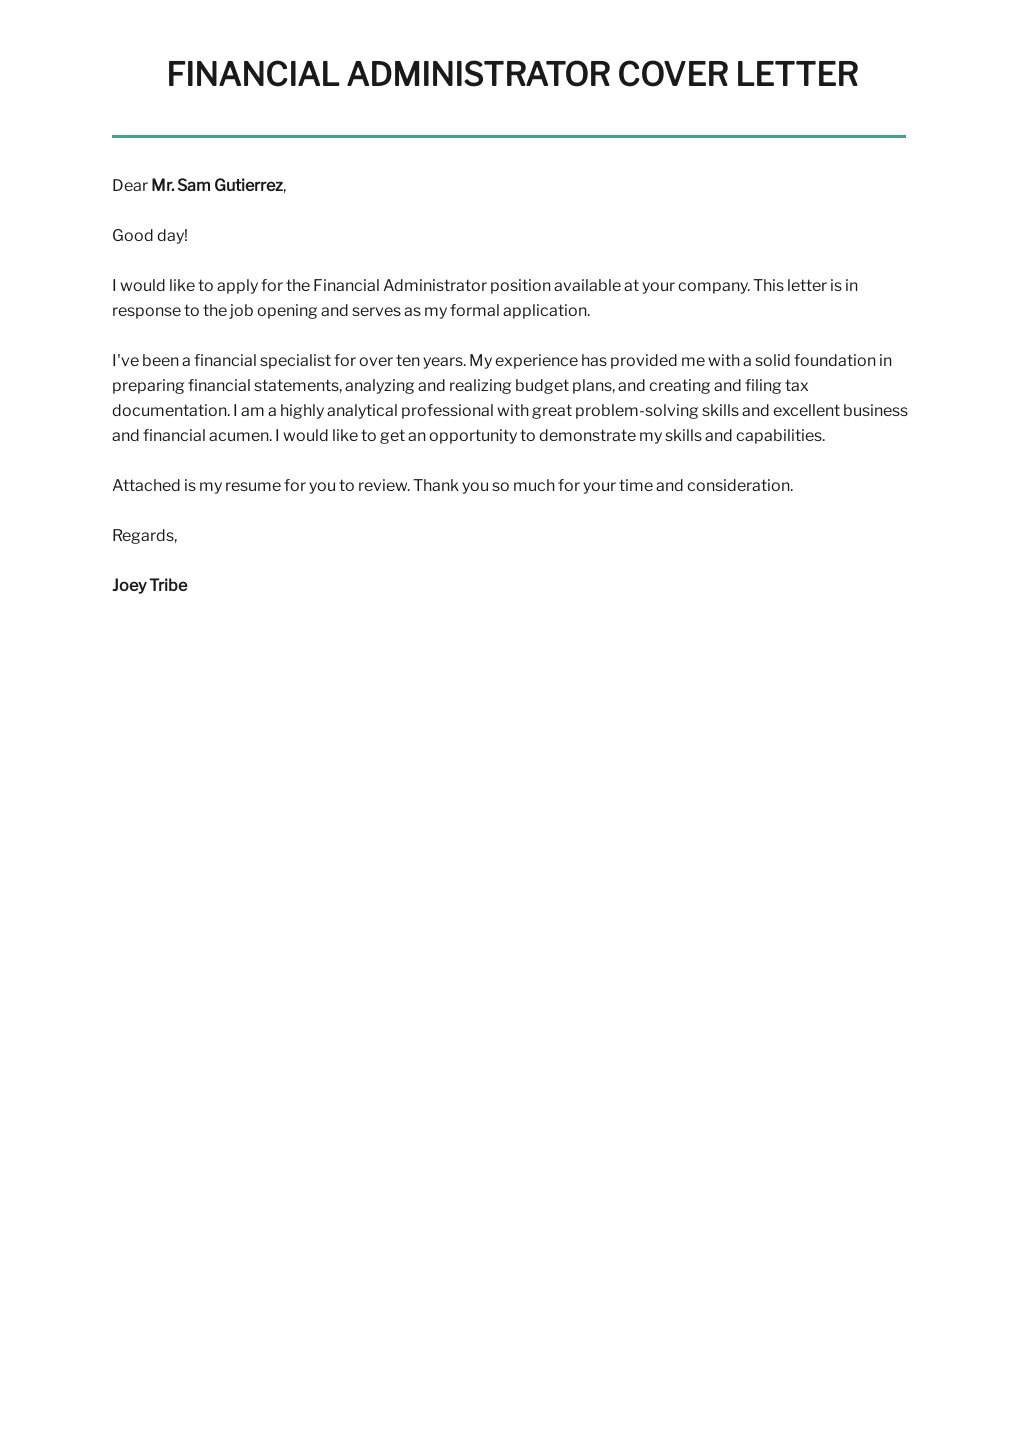 Free Financial Administrator Cover Letter Template.jpe